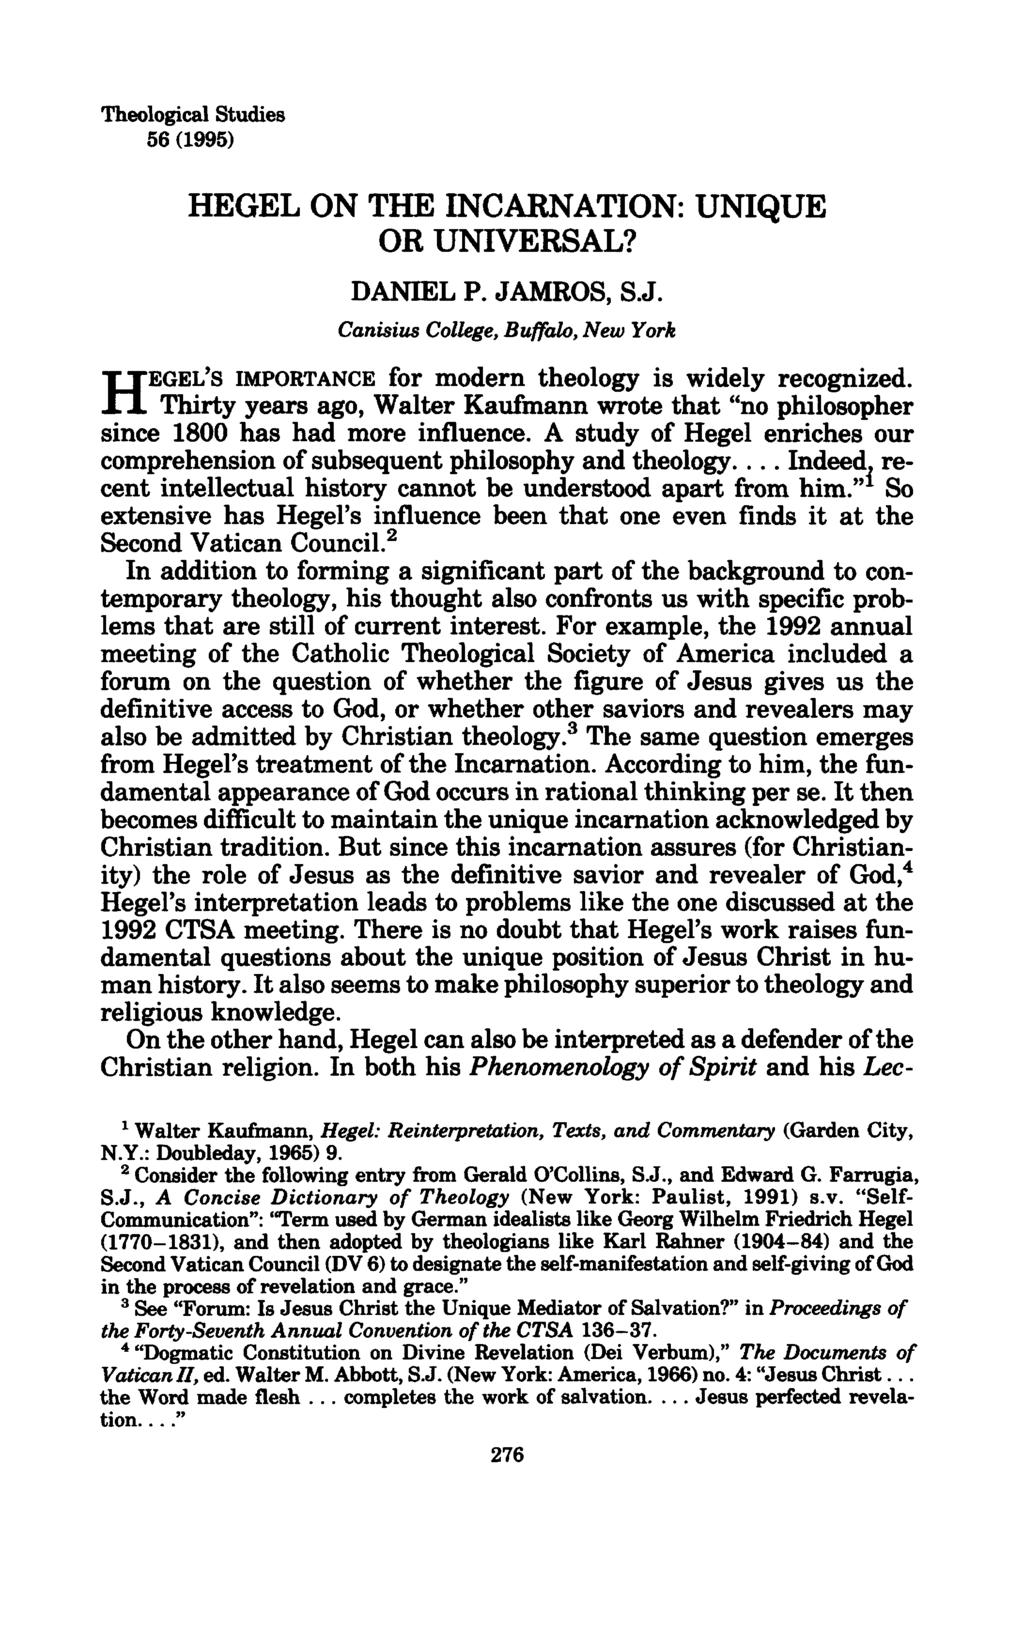 Theological Studies 56 (1995) HEGEL ON THE INCARNATION: UNIQUE OR UNIVERSAL? DANIEL P. JAMROS, S J. Canisius College, Buffalo, New York HEGEL'S IMPORTANCE for modern theology is widely recognized.